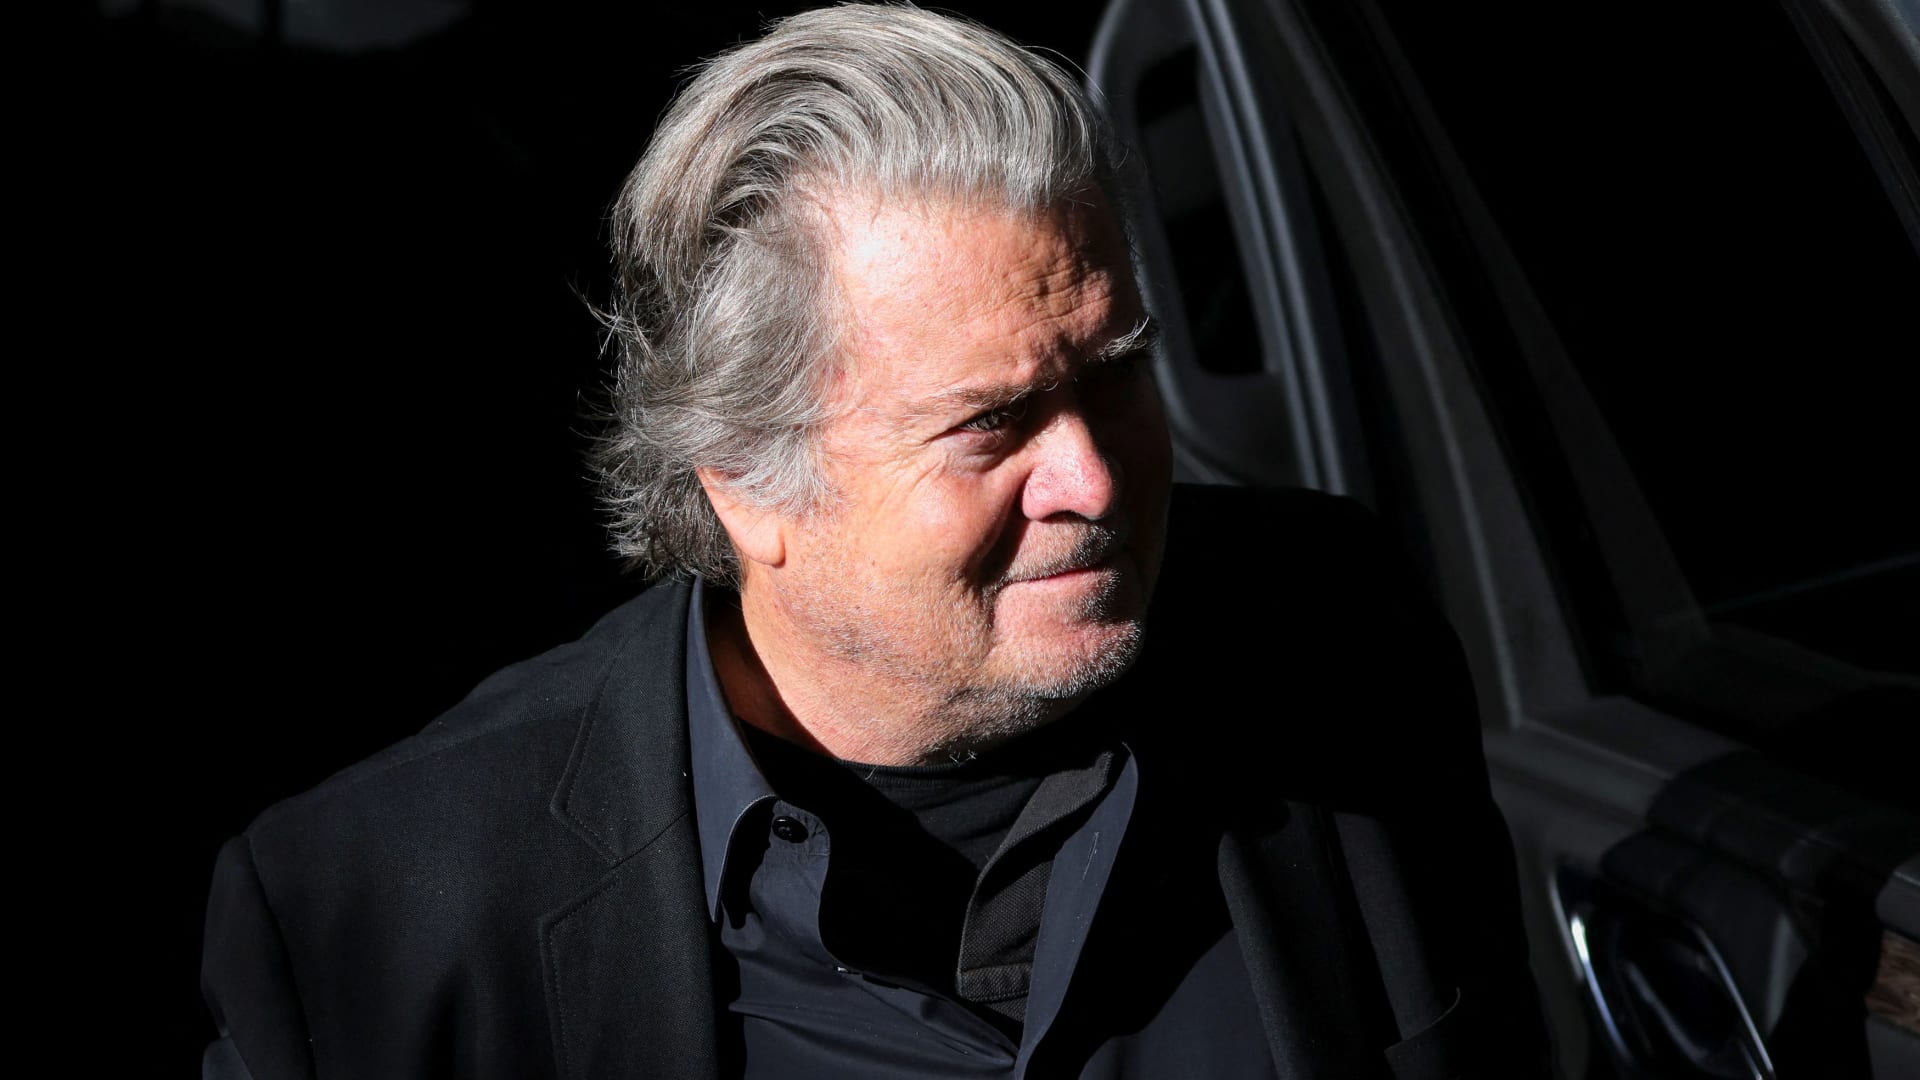 Former top Trump White House aide Steve Bannon surrenders in New York court to face criminal charges